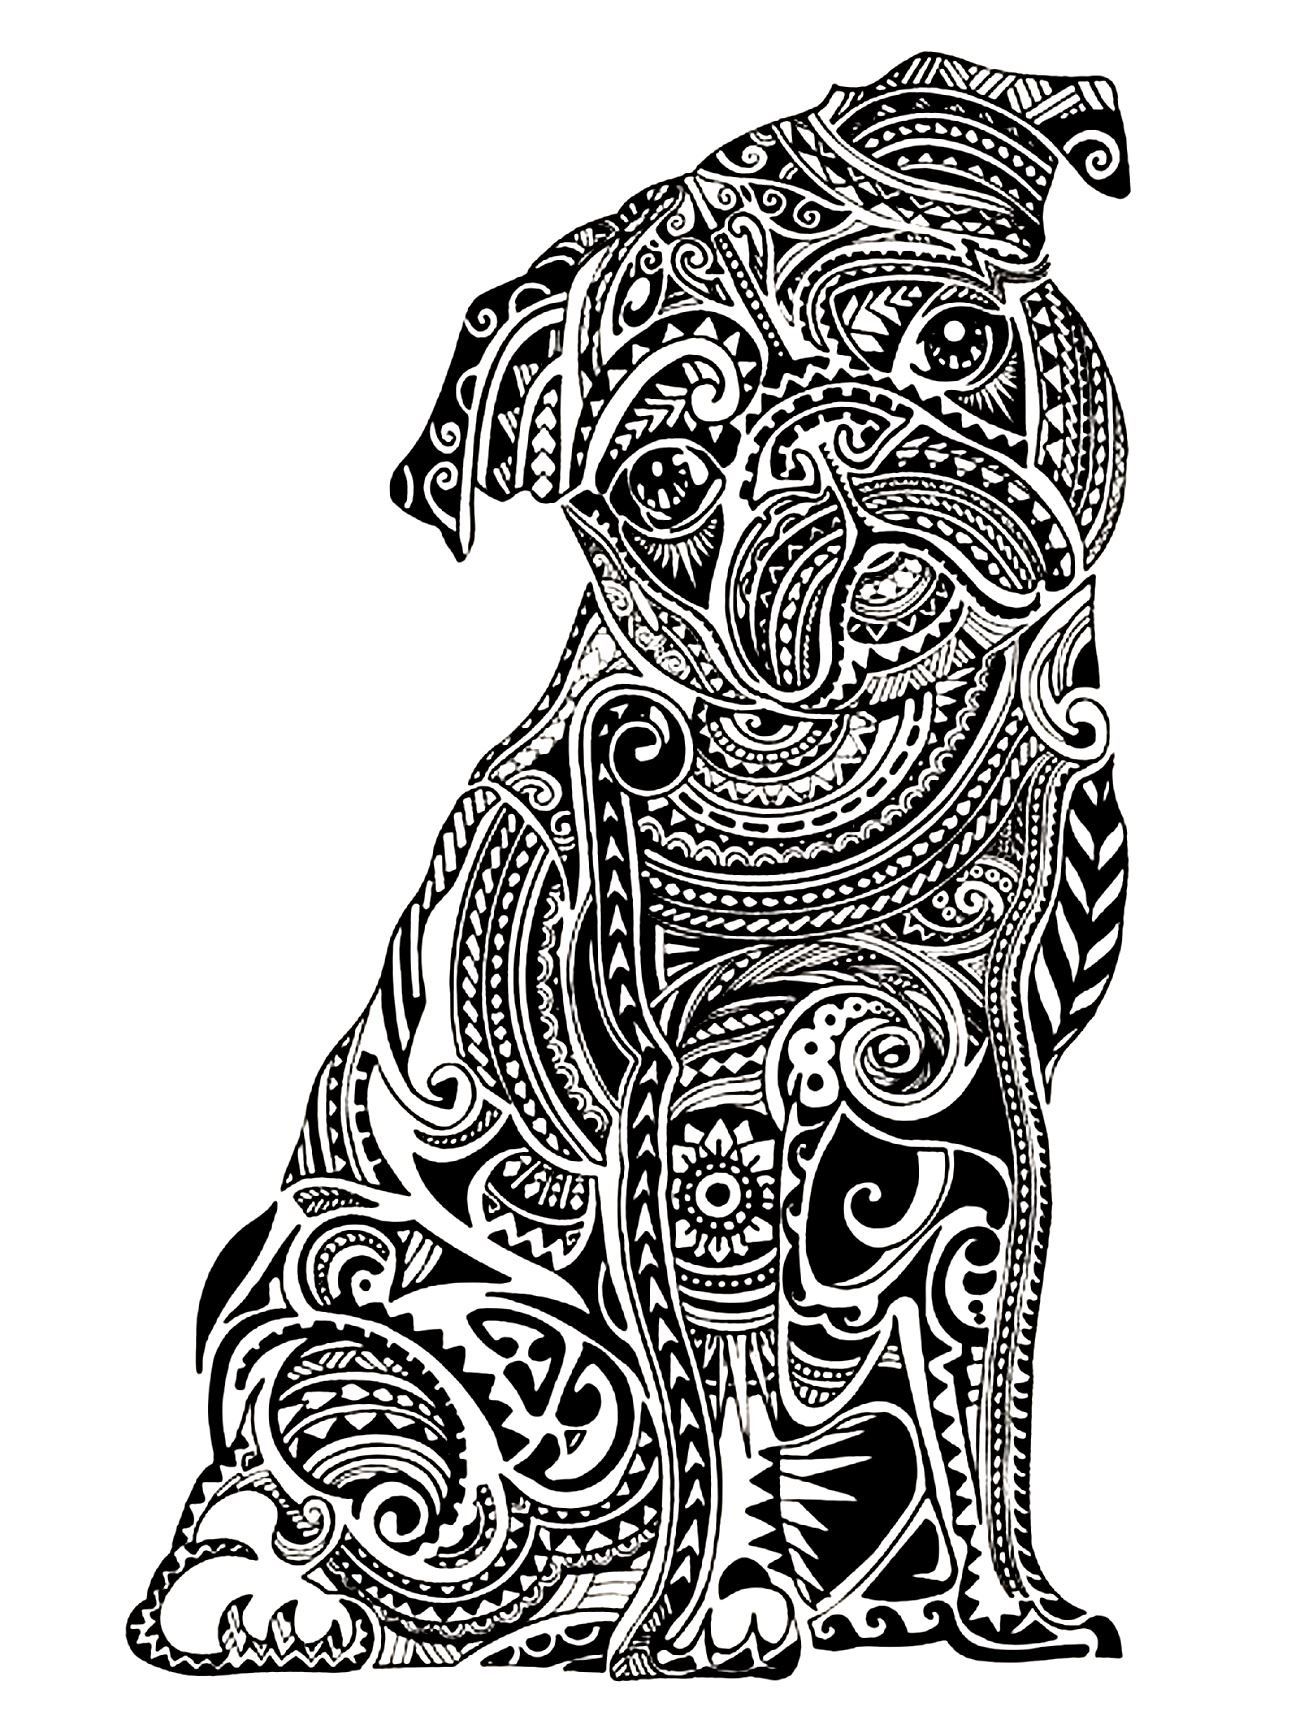 Get the coloring page: Pug | 50 Printable Adult Colouring Pages ...